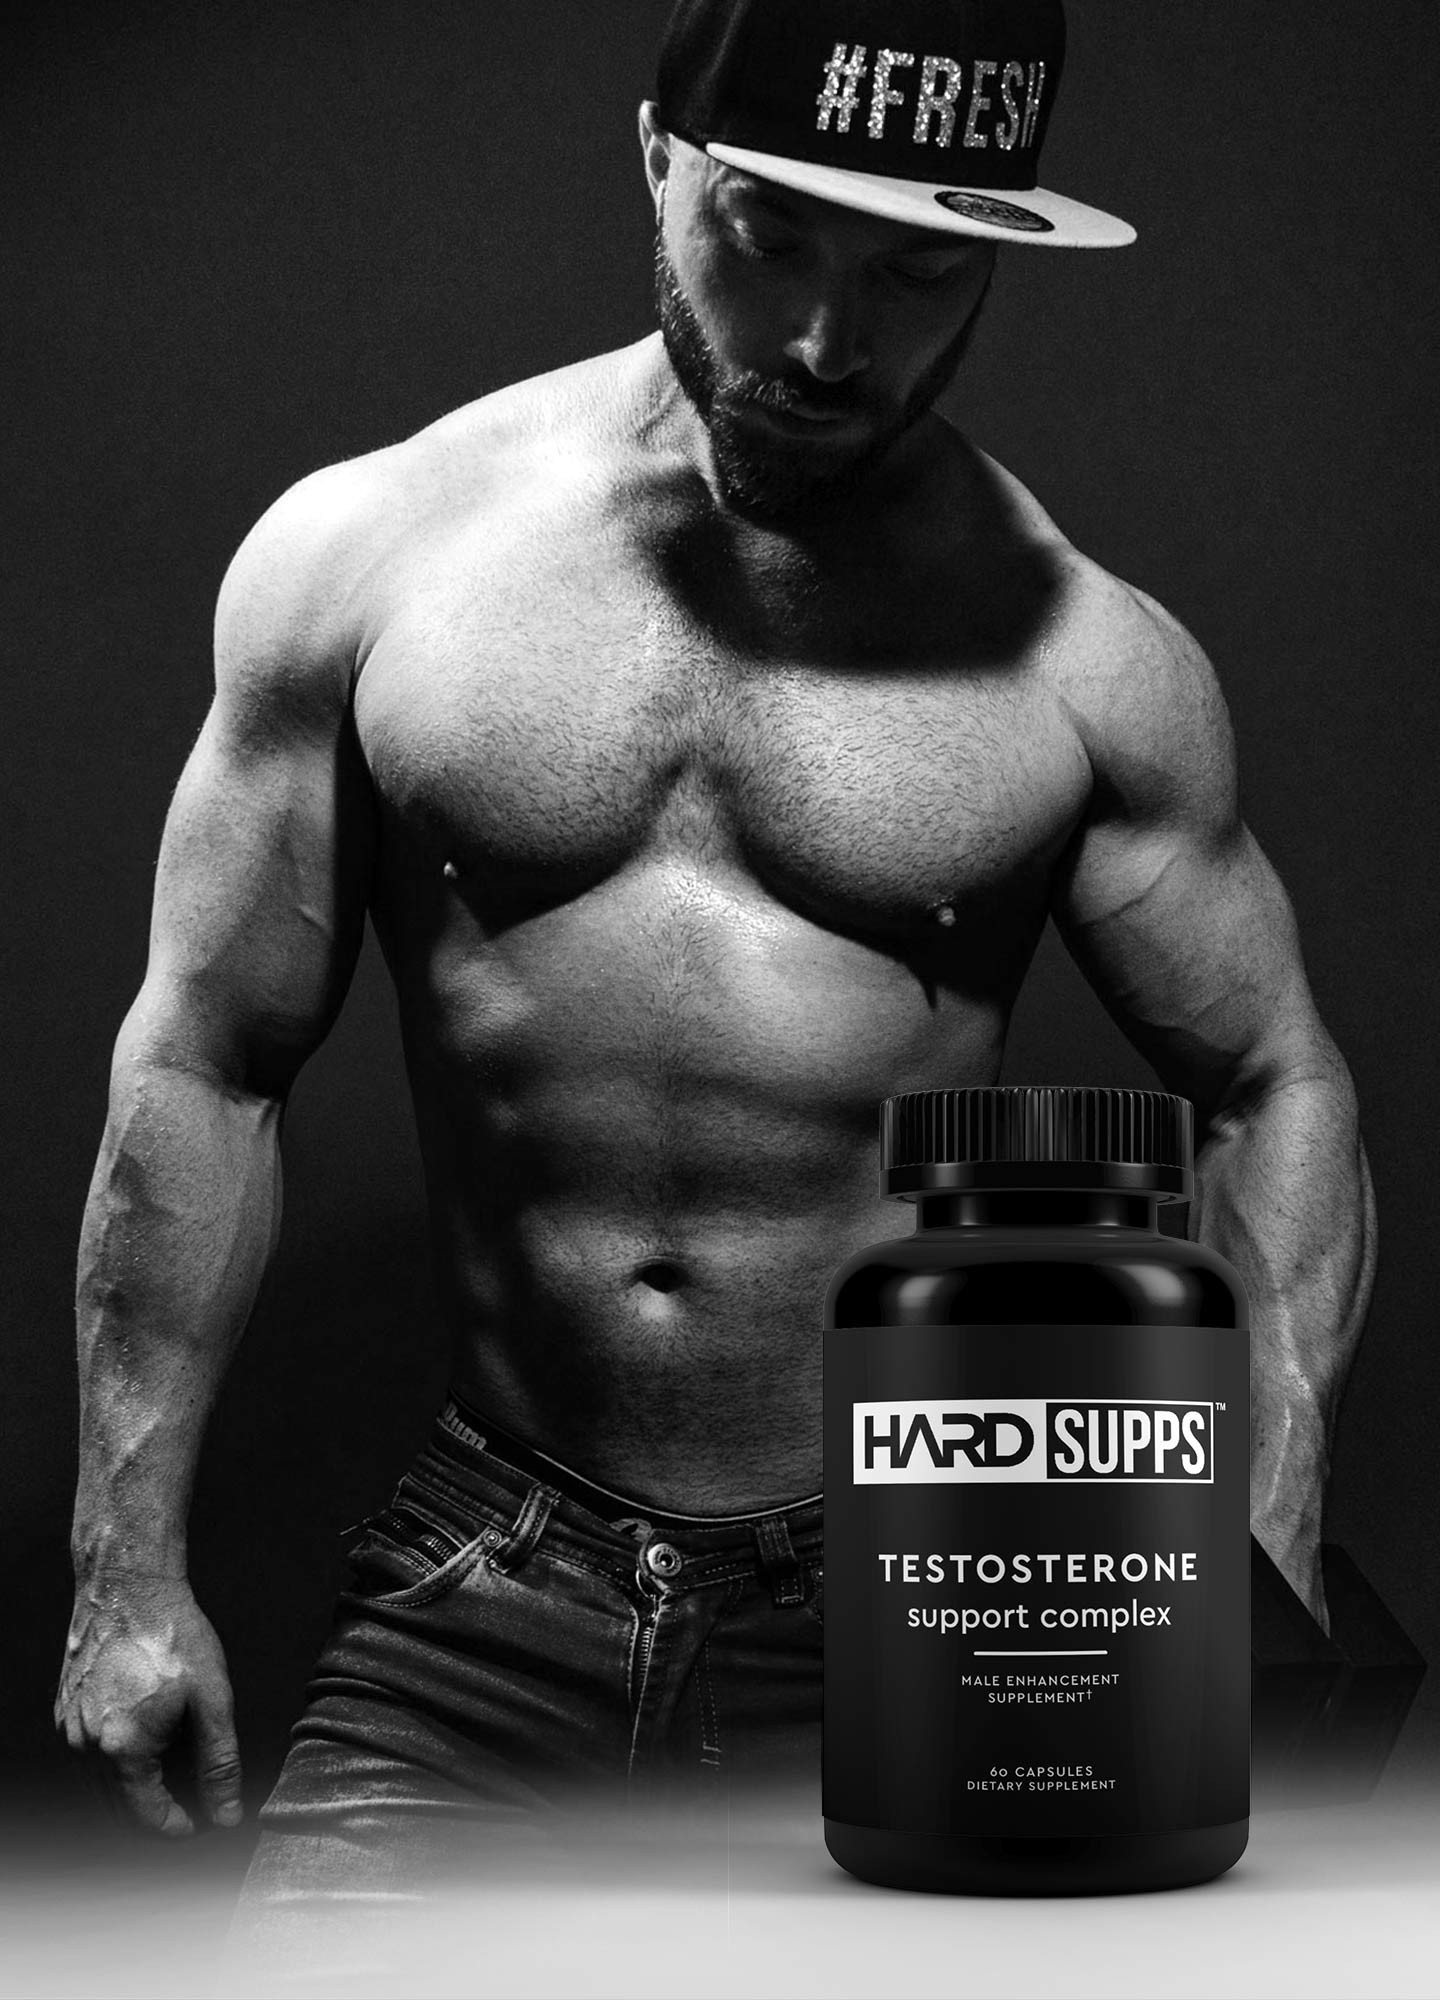 HARD SUPPS – Natural Testosterone Booster